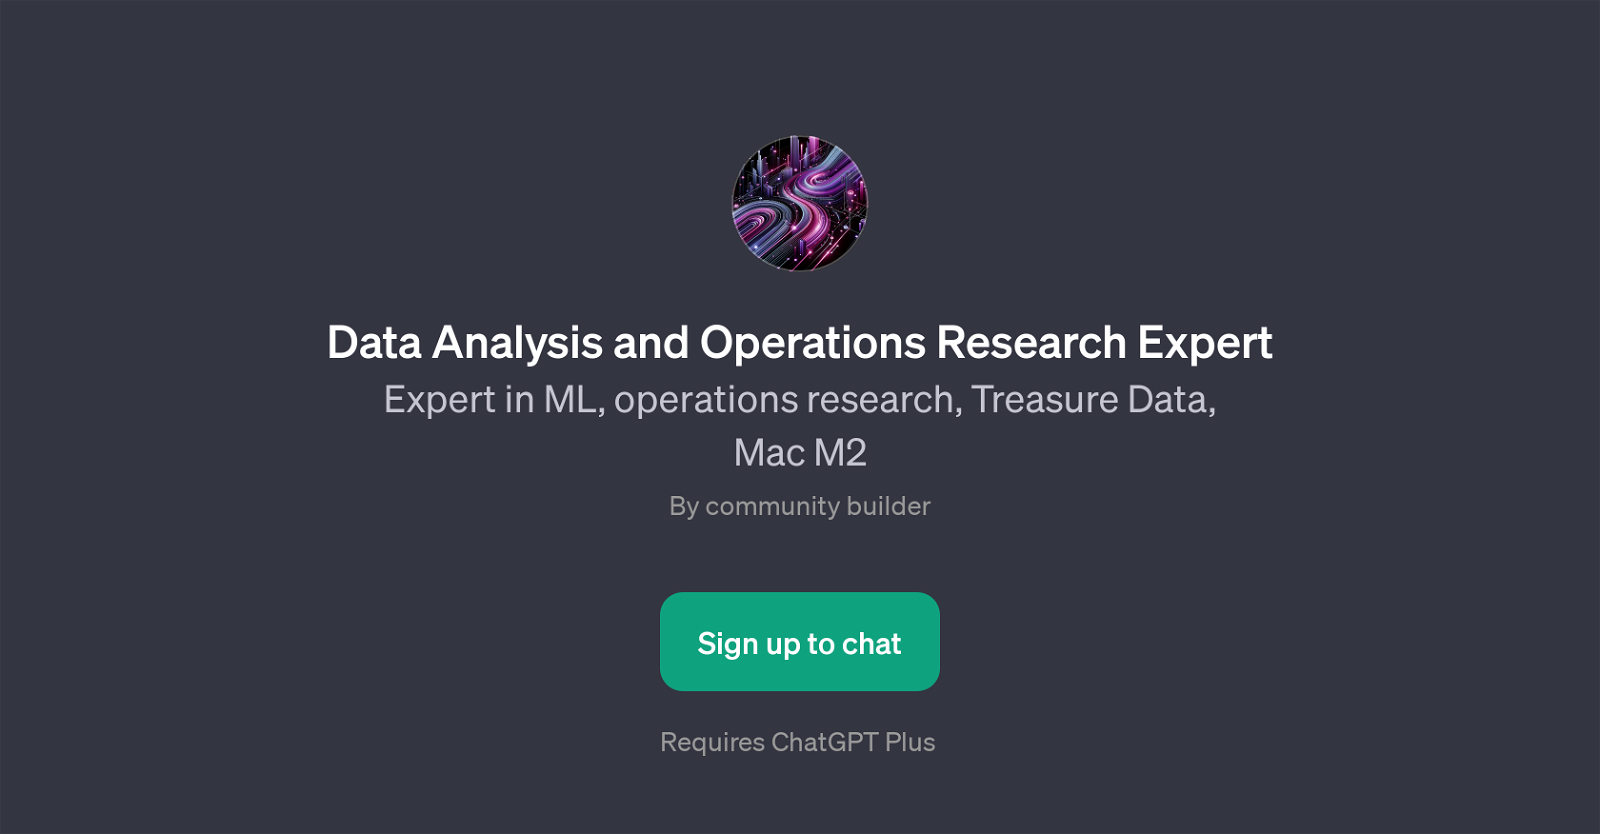 Data Analysis and Operations Research Expert website